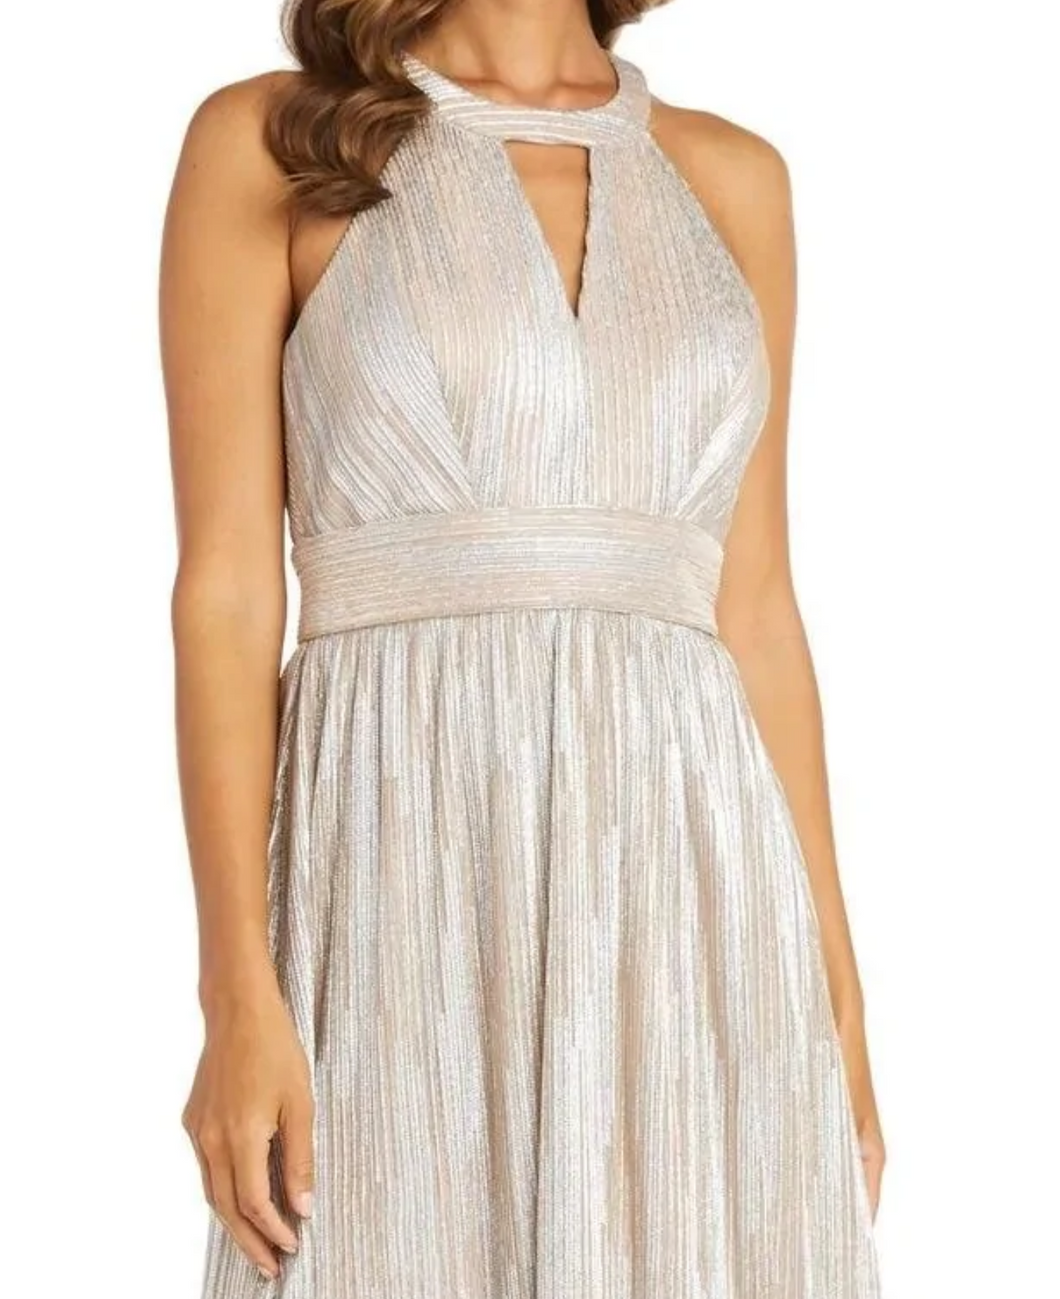 Nightway Retro Metallic Formal Gown Party, Cocktail